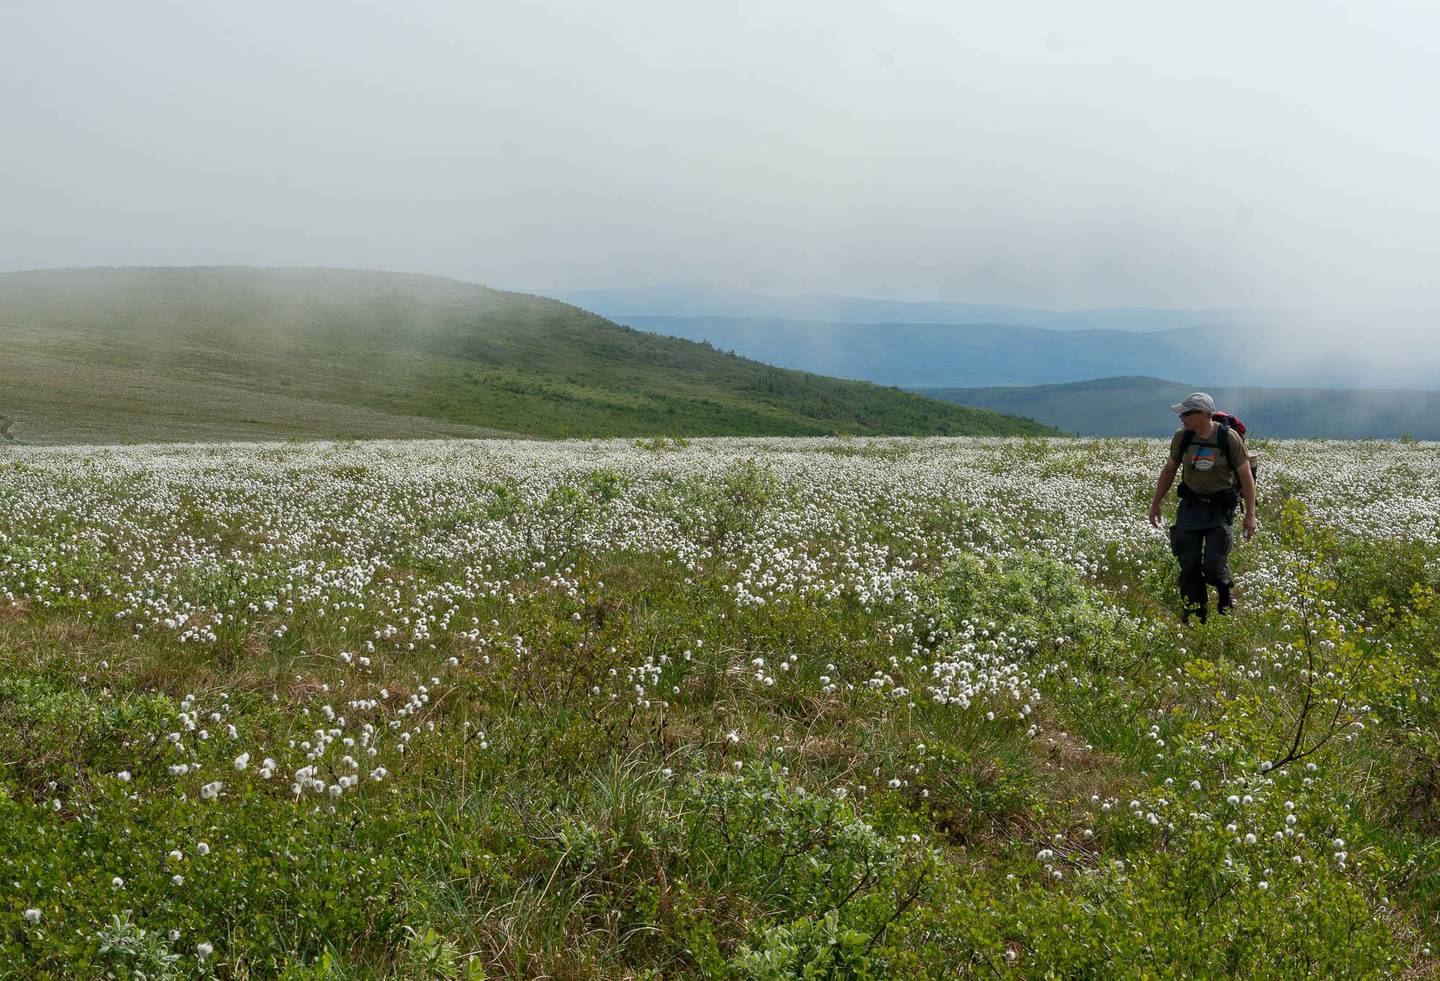 Alaska cotton refers to several species of cotton grass that grow in Alaska’s boggy areas